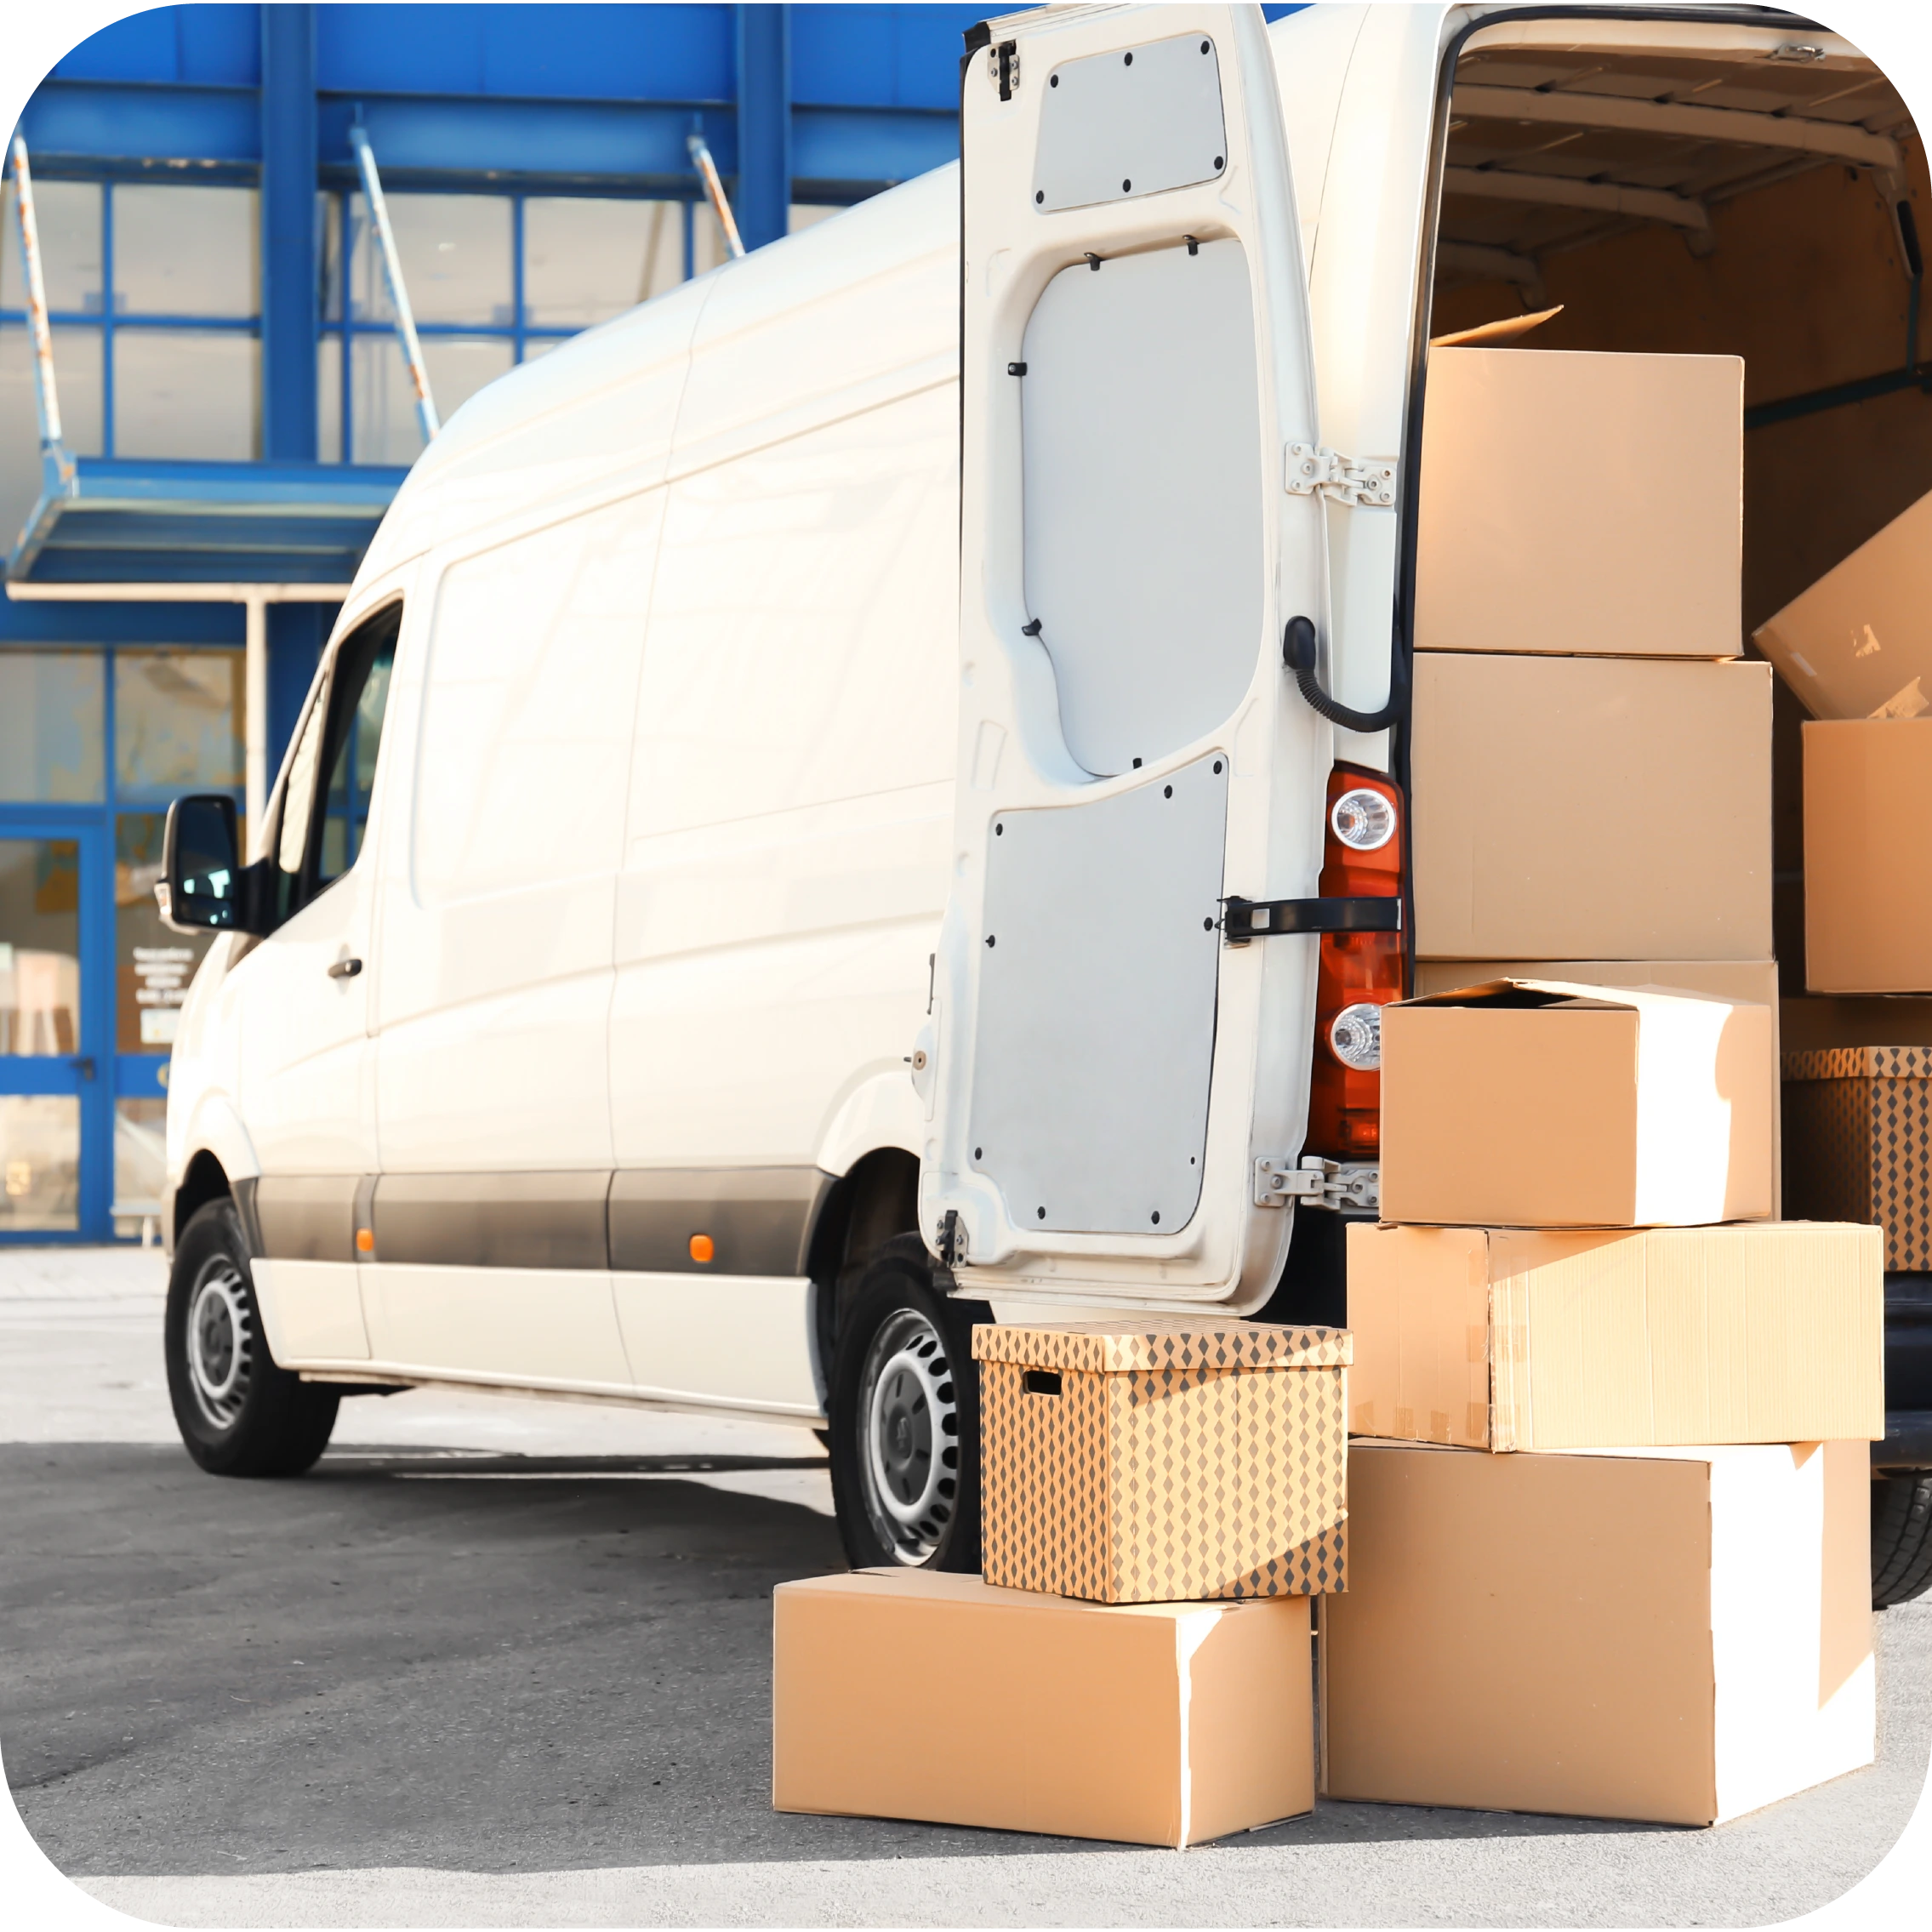 What impact does asset tracking have on logistics companies